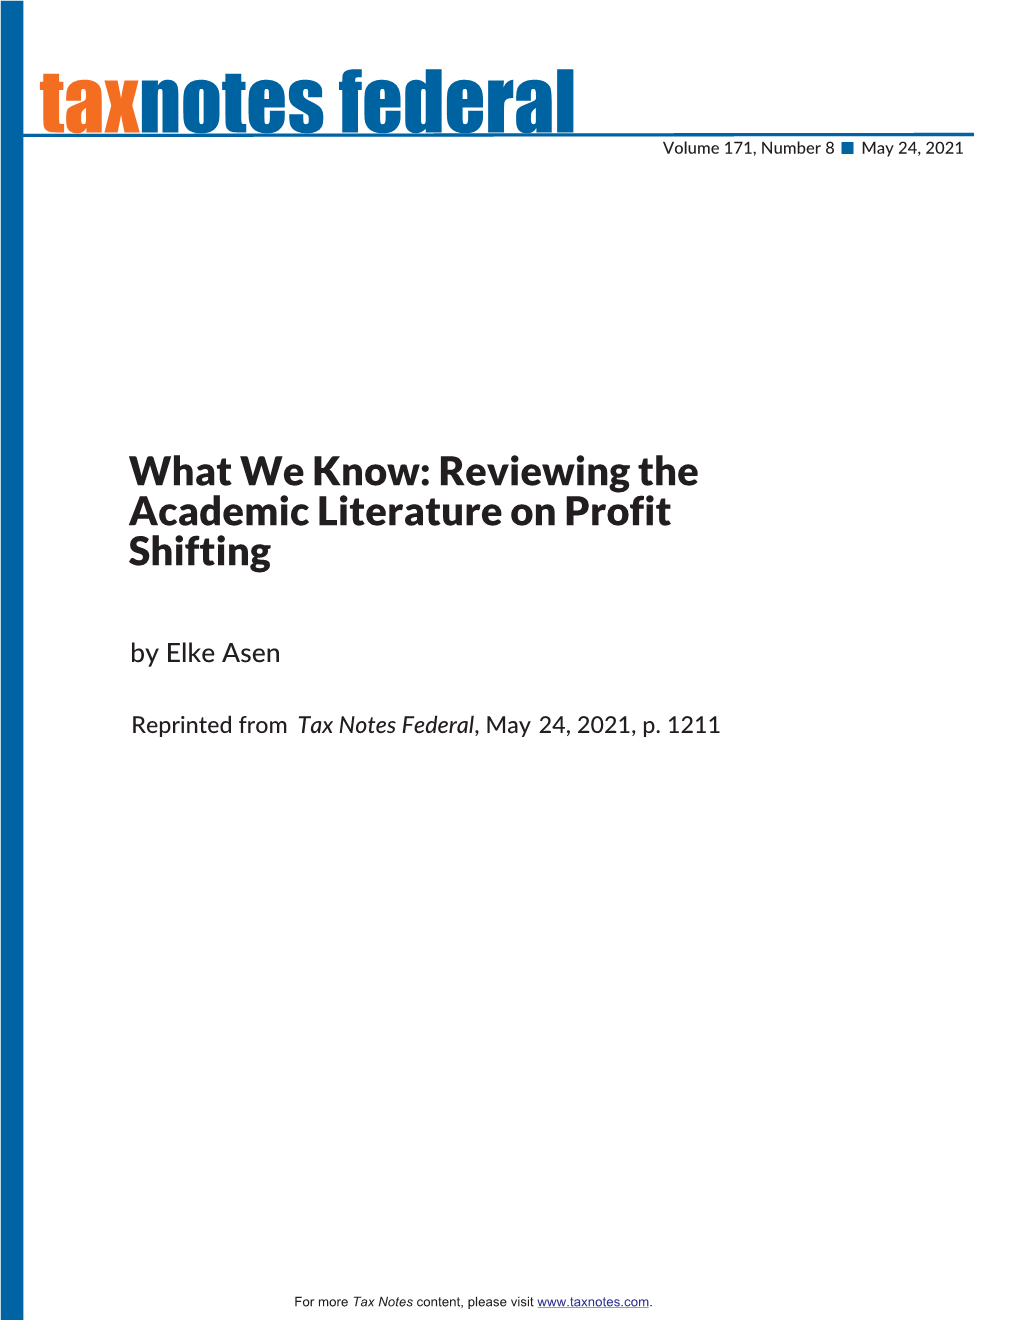 What We Know: Reviewing the Academic Literature on Profit Shifting